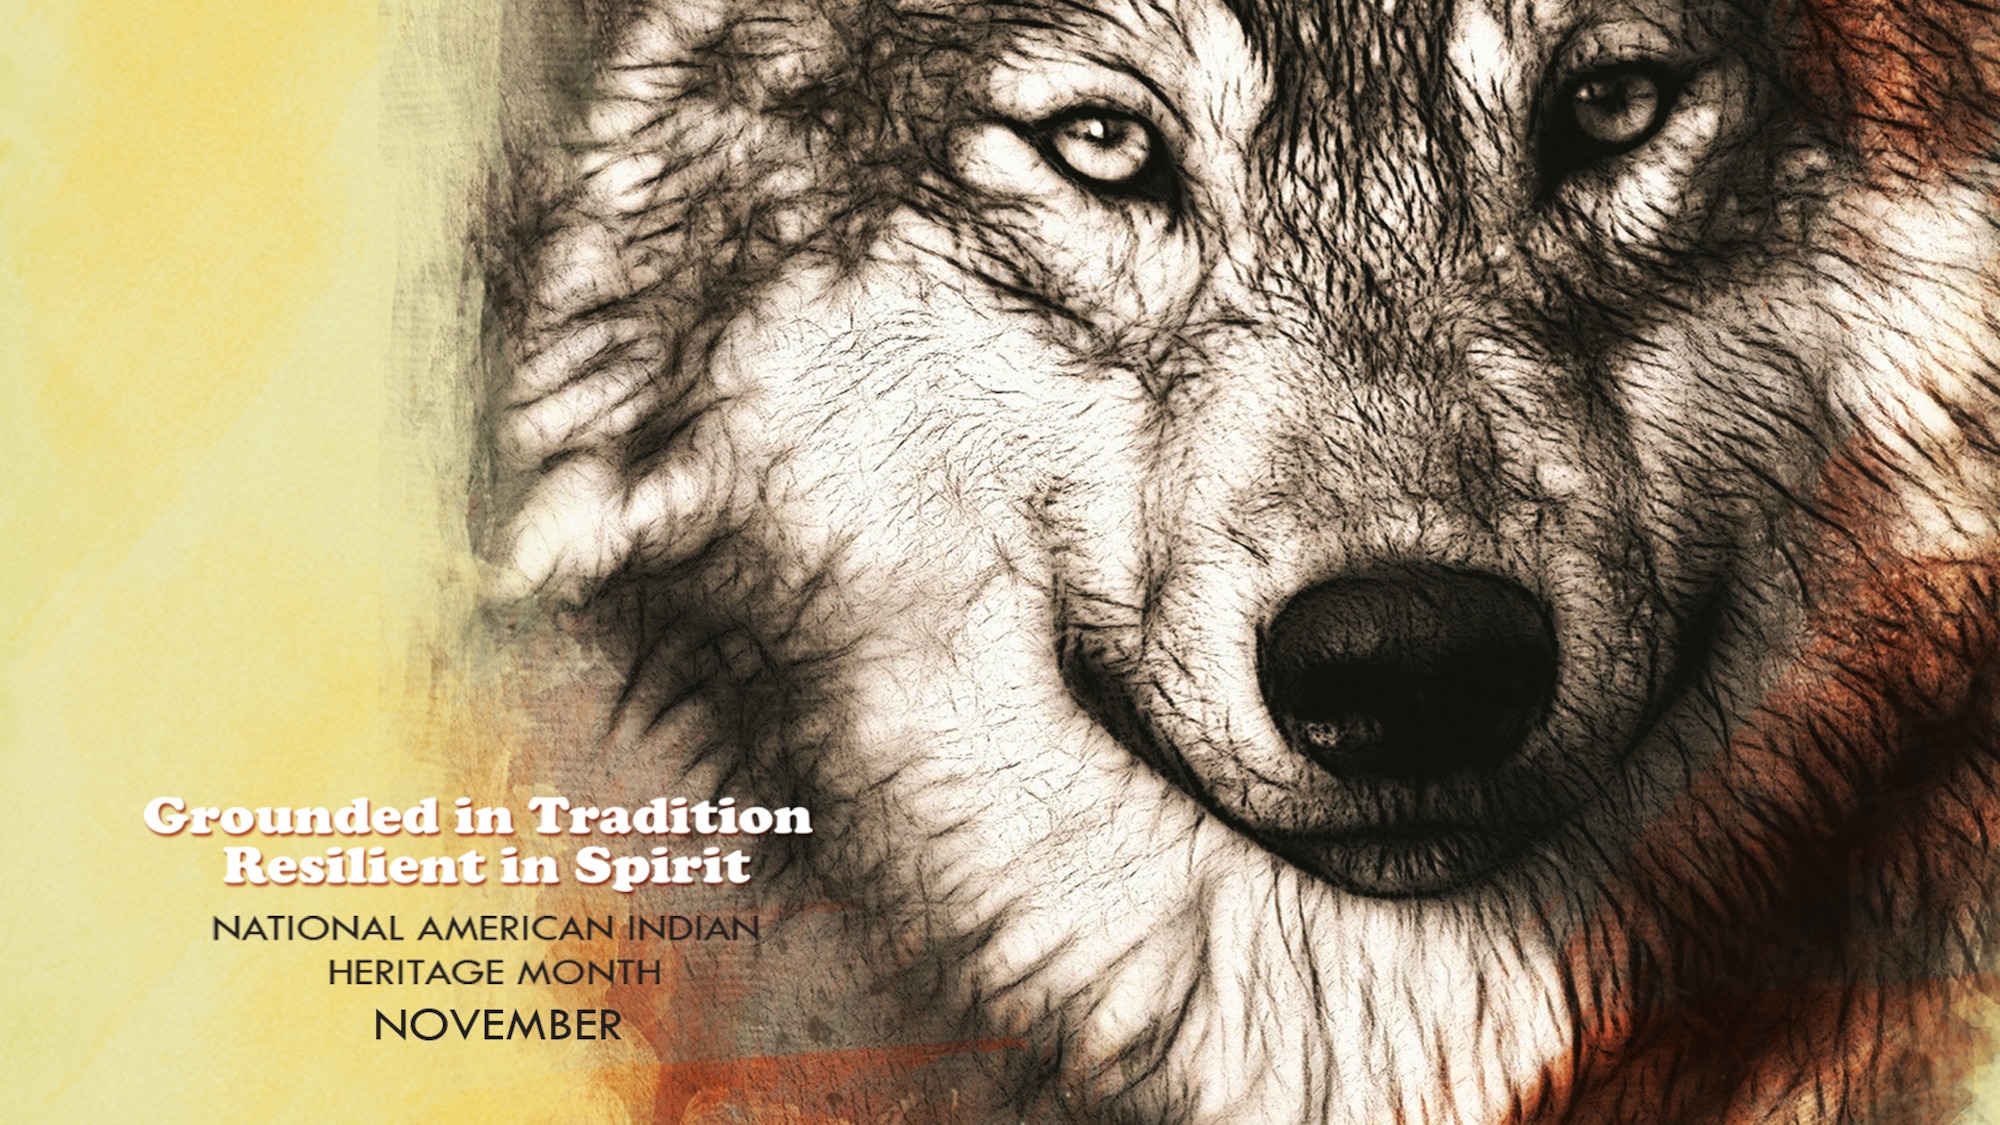 The image depicts a rendered photograph of a large gray
wolf head with black and white fur and markings with the words: "Grounded in Tradition, Resilient
in Spirit"  and "National American Indian Heritage Month - November"